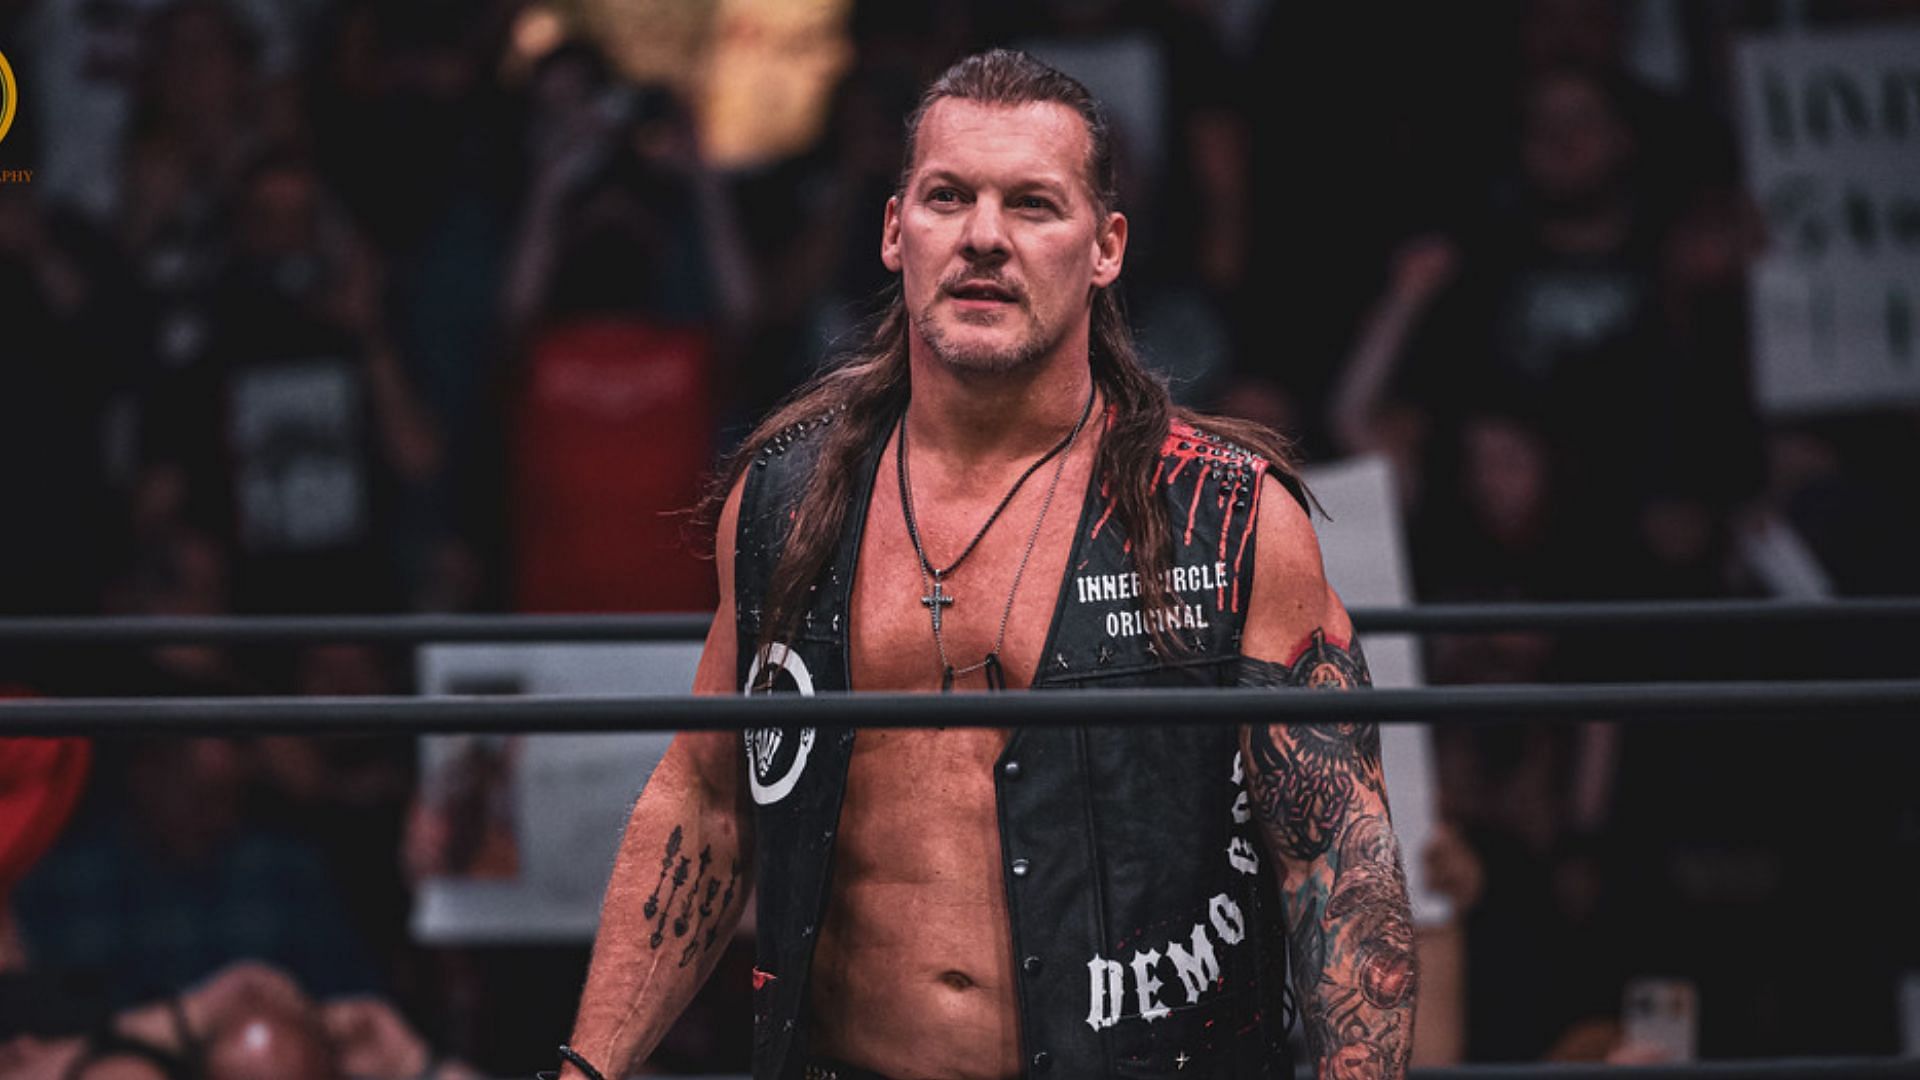 Chris Jericho at an AEW Dynamite event in 2022